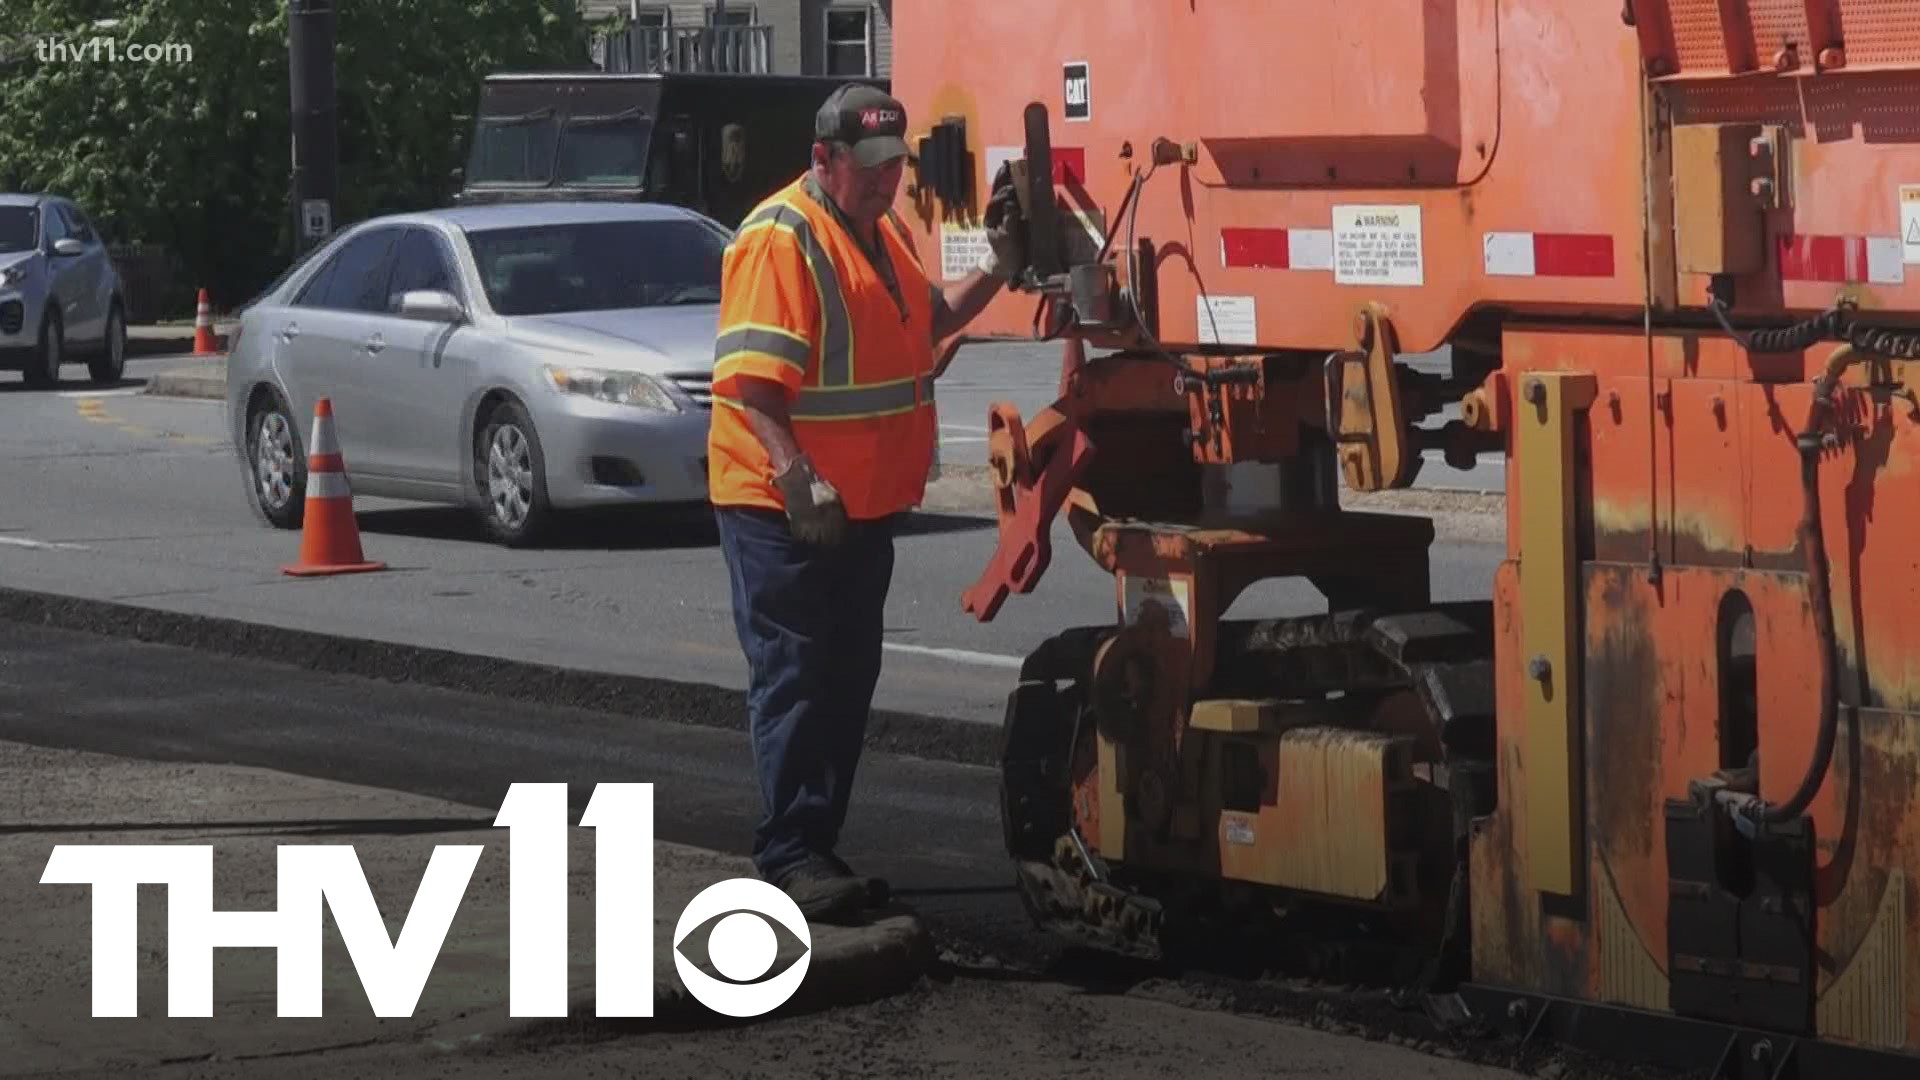 The Arkansas Department of Transportation began fixing potholes along the streets of JFK after business owners in the area expressed their concerns.